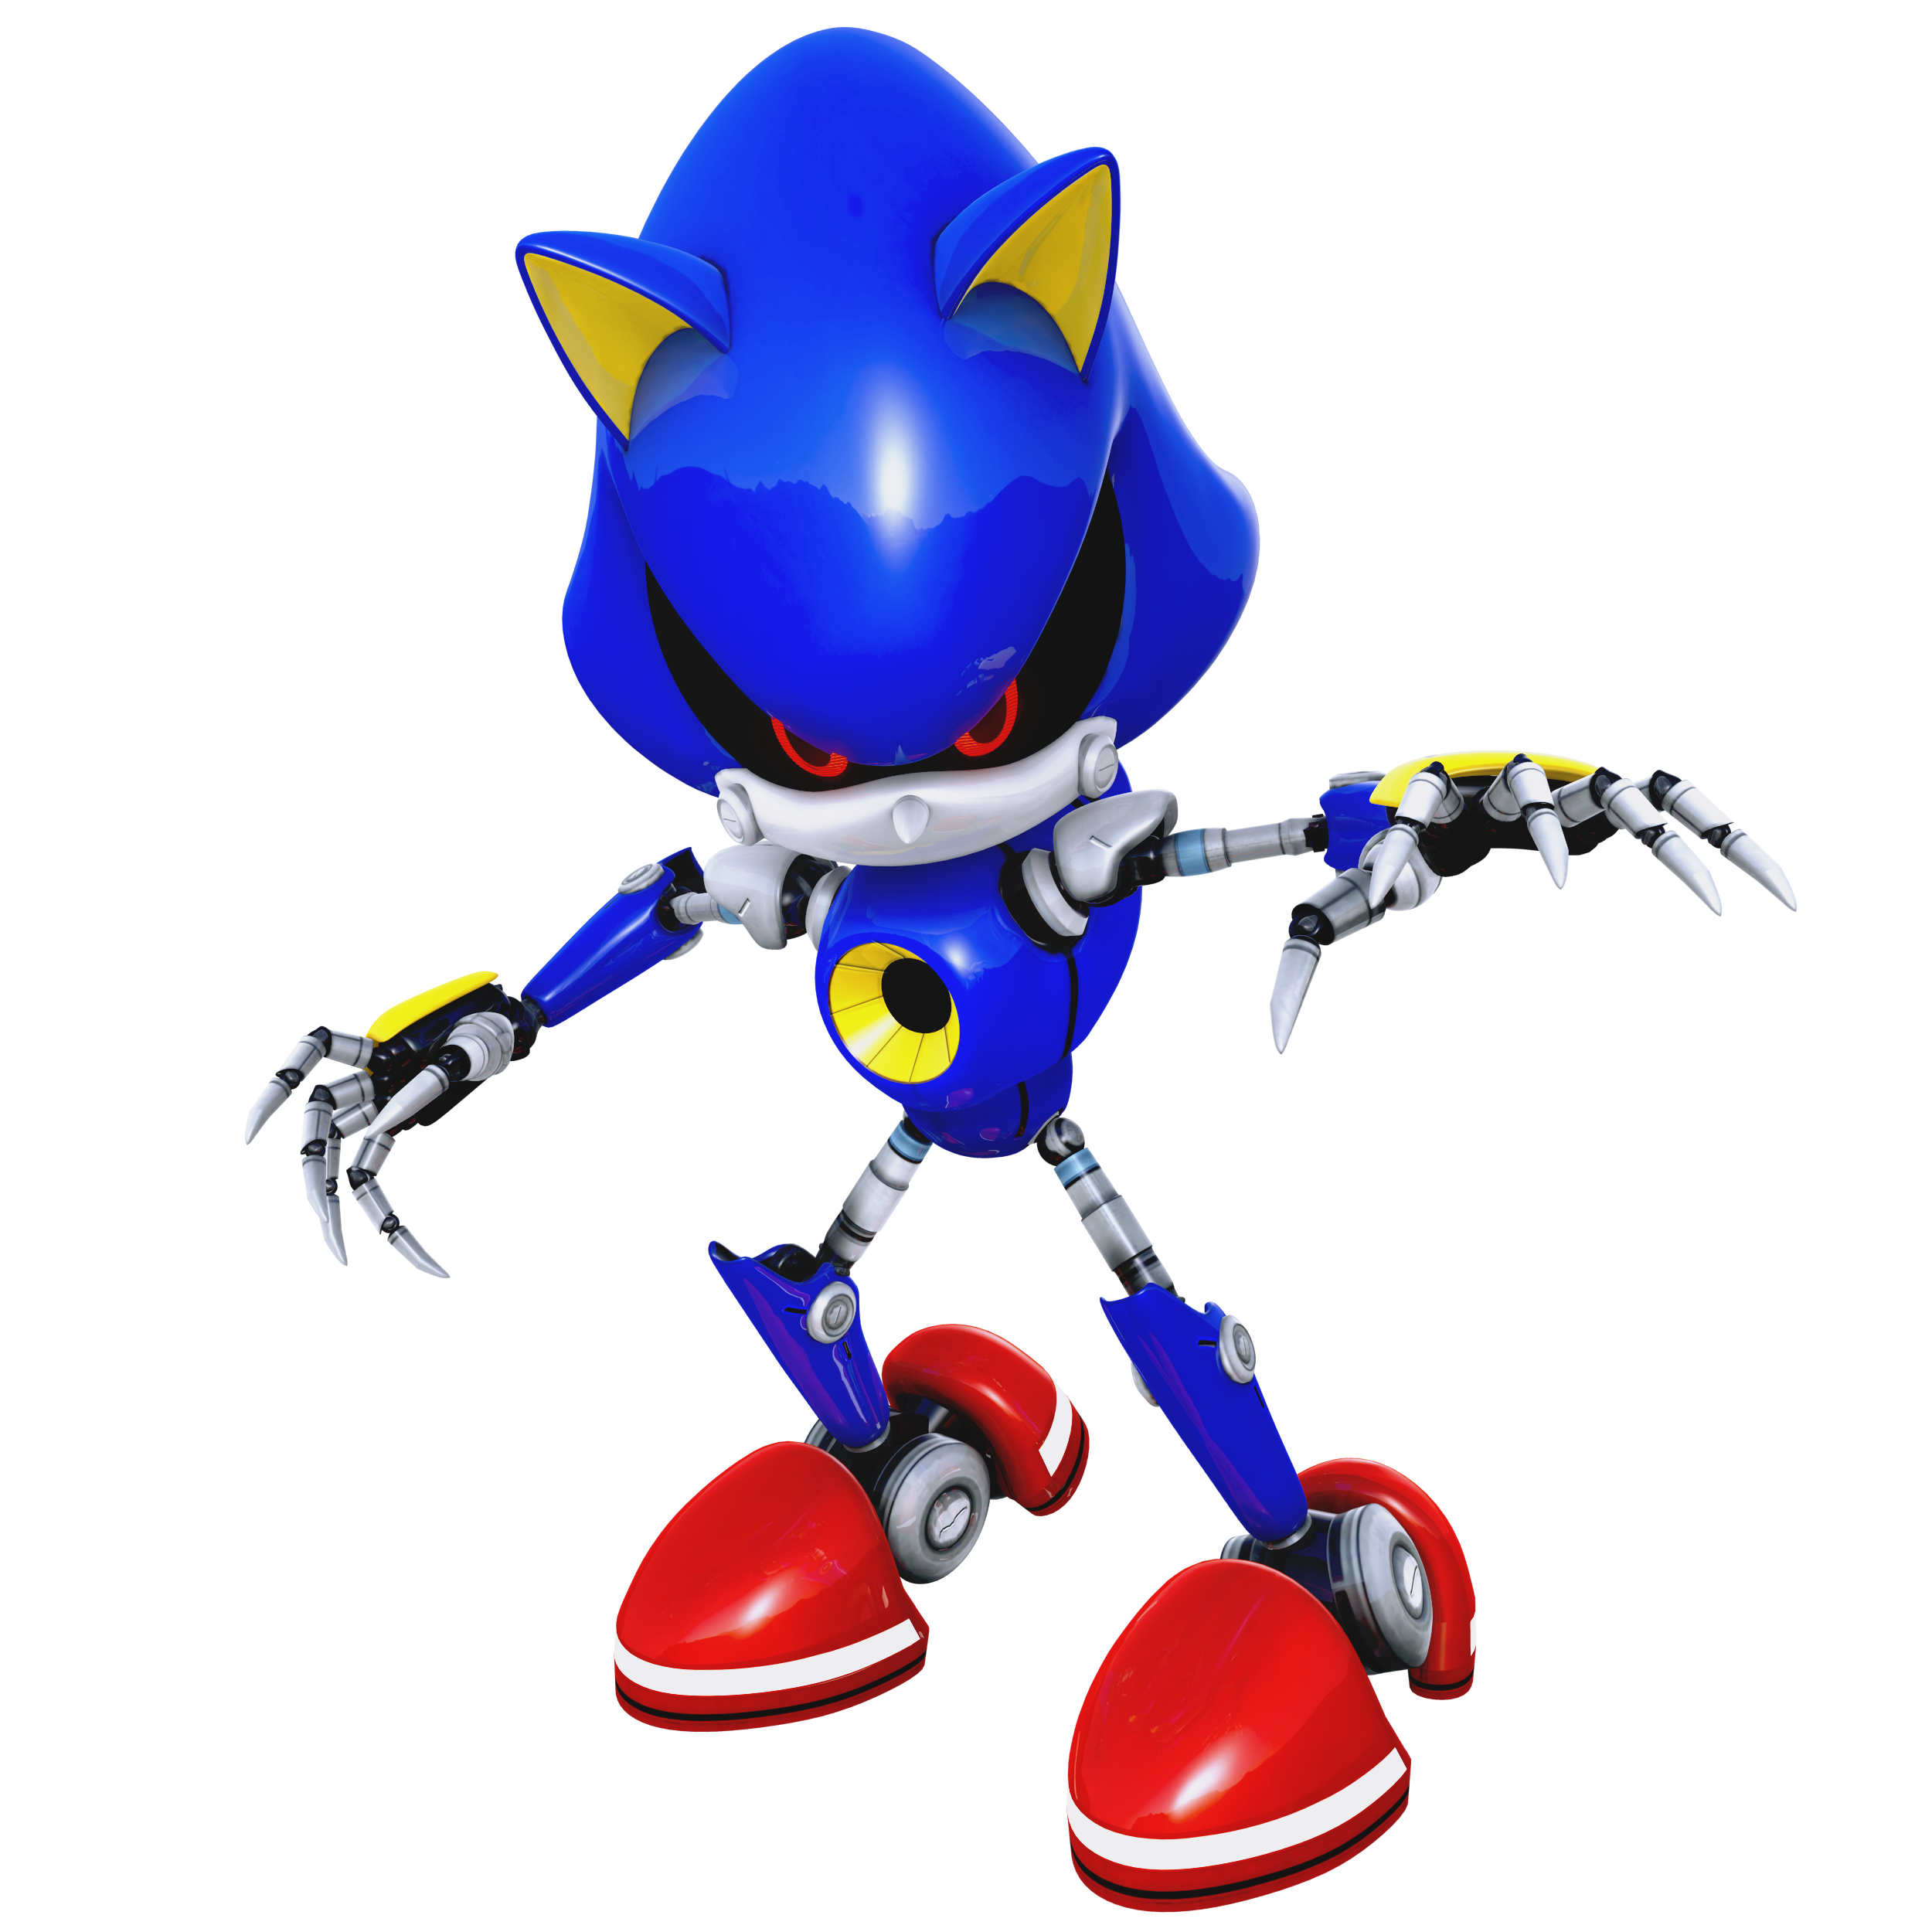 Nibroc.Rock on X: heres some showcases of the neo metal sonic model and a  unused preview image  / X